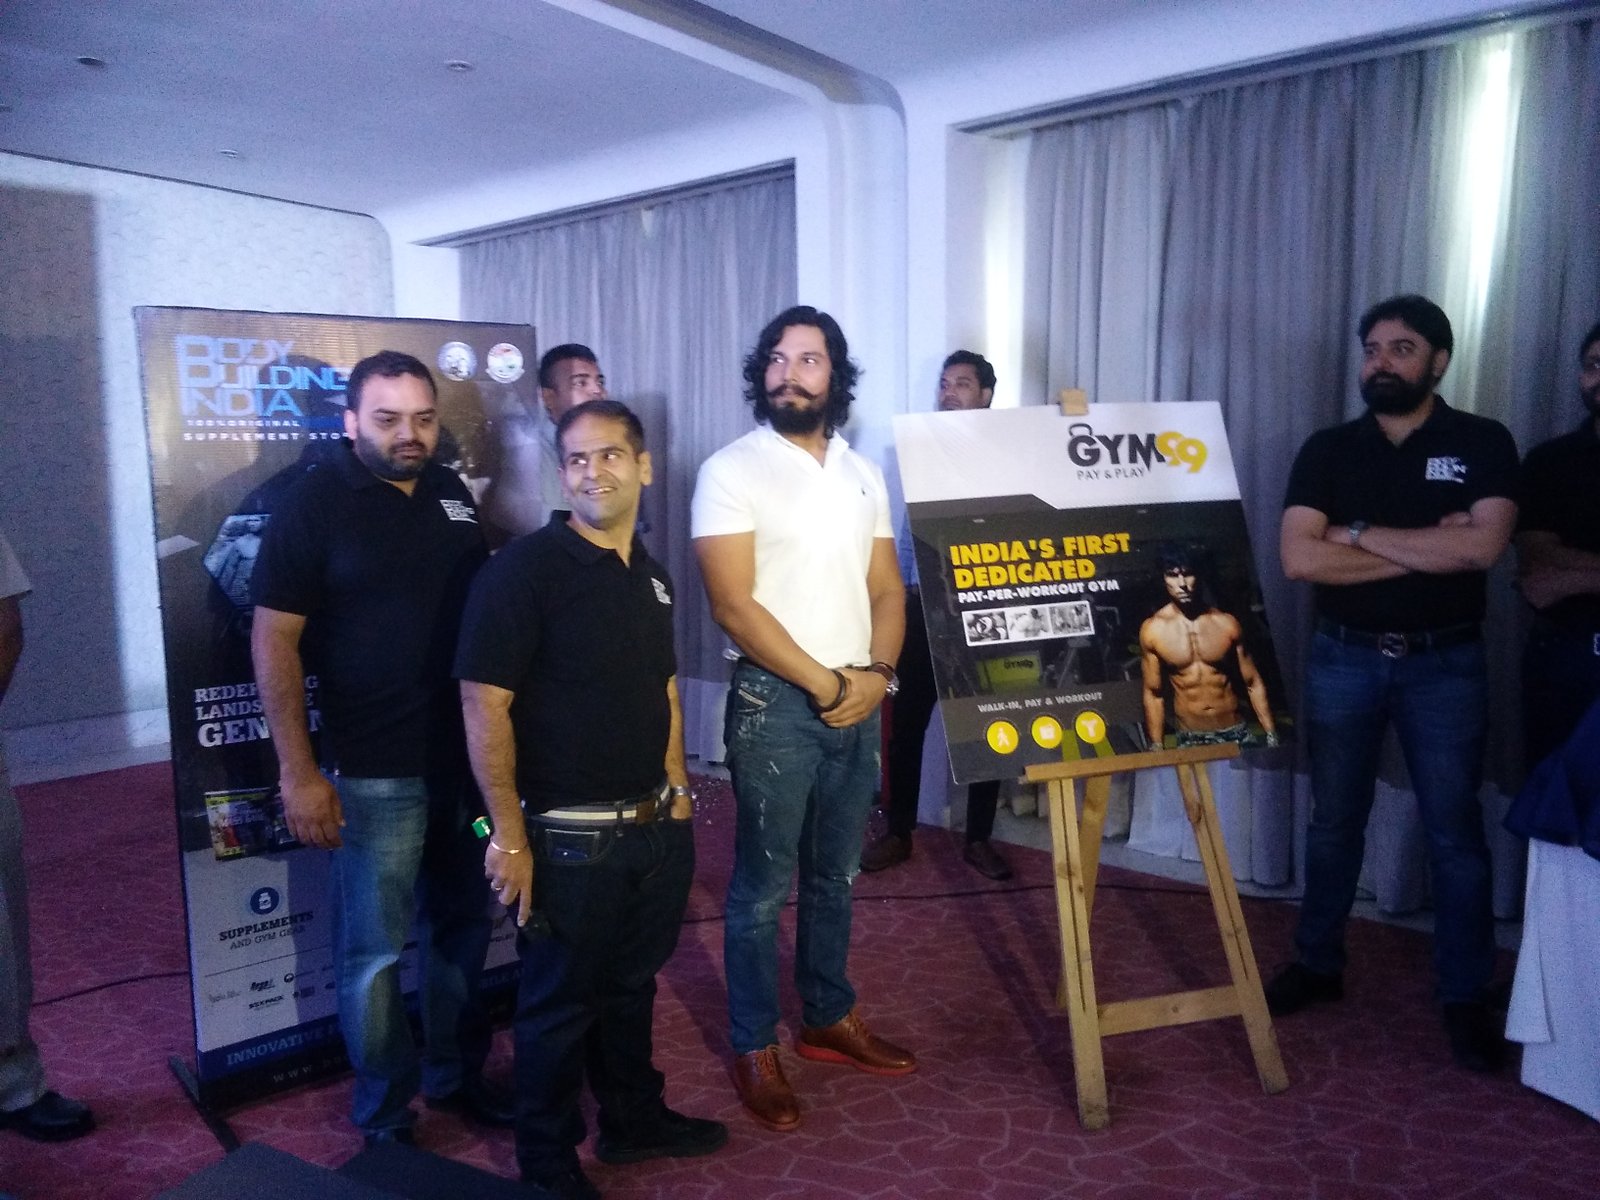 randeep-hooda-launches-gym-99-with-bbi-also-emphasis-on-having-rich-nutrient-diet